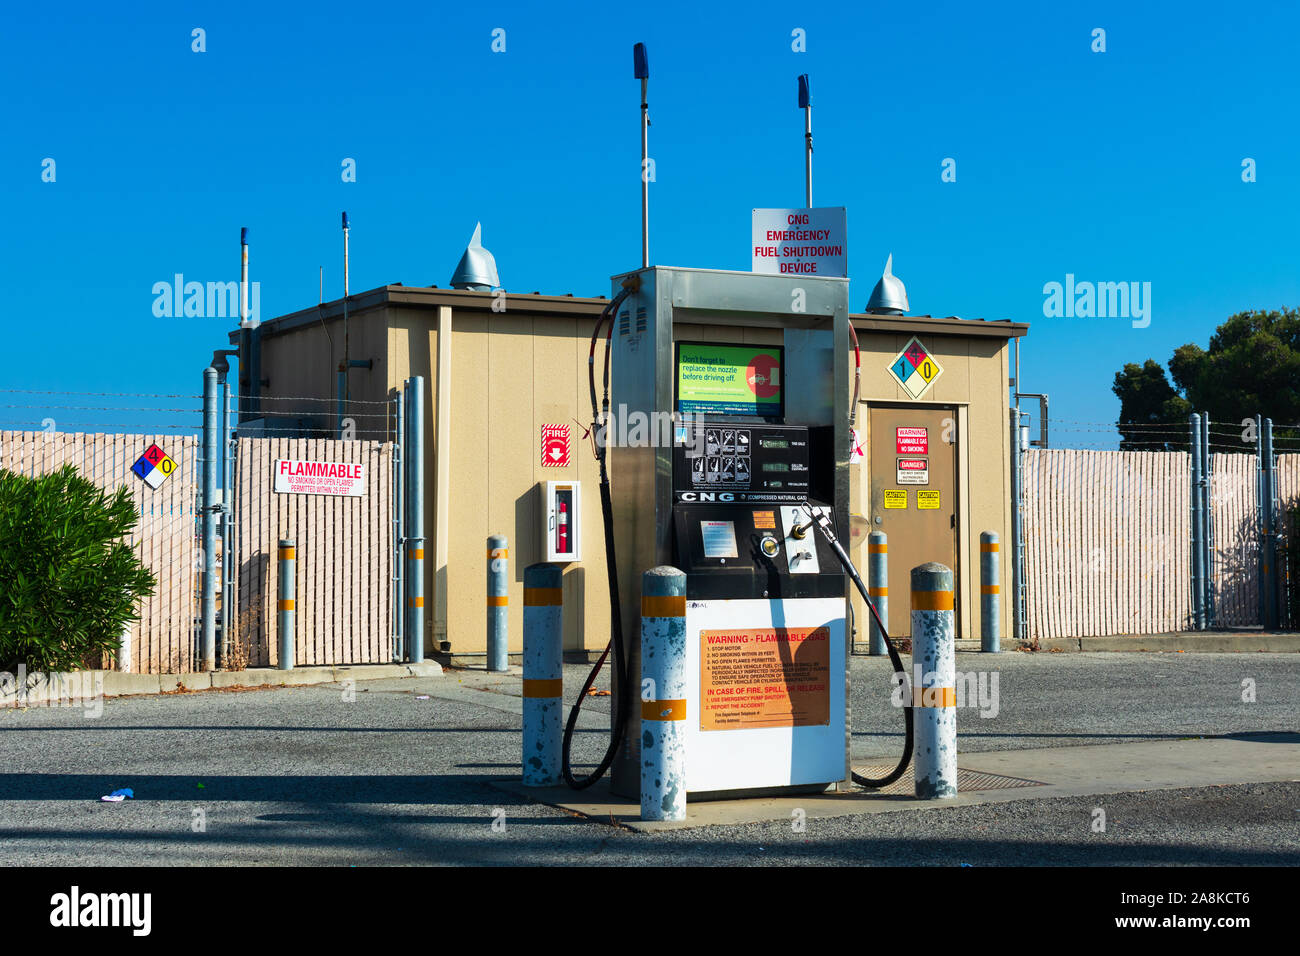 CNG, compressed natural gas, fueling public self service station for refueling natural gas vehicles. Flammable warning. Bollards secure the station fr Stock Photo